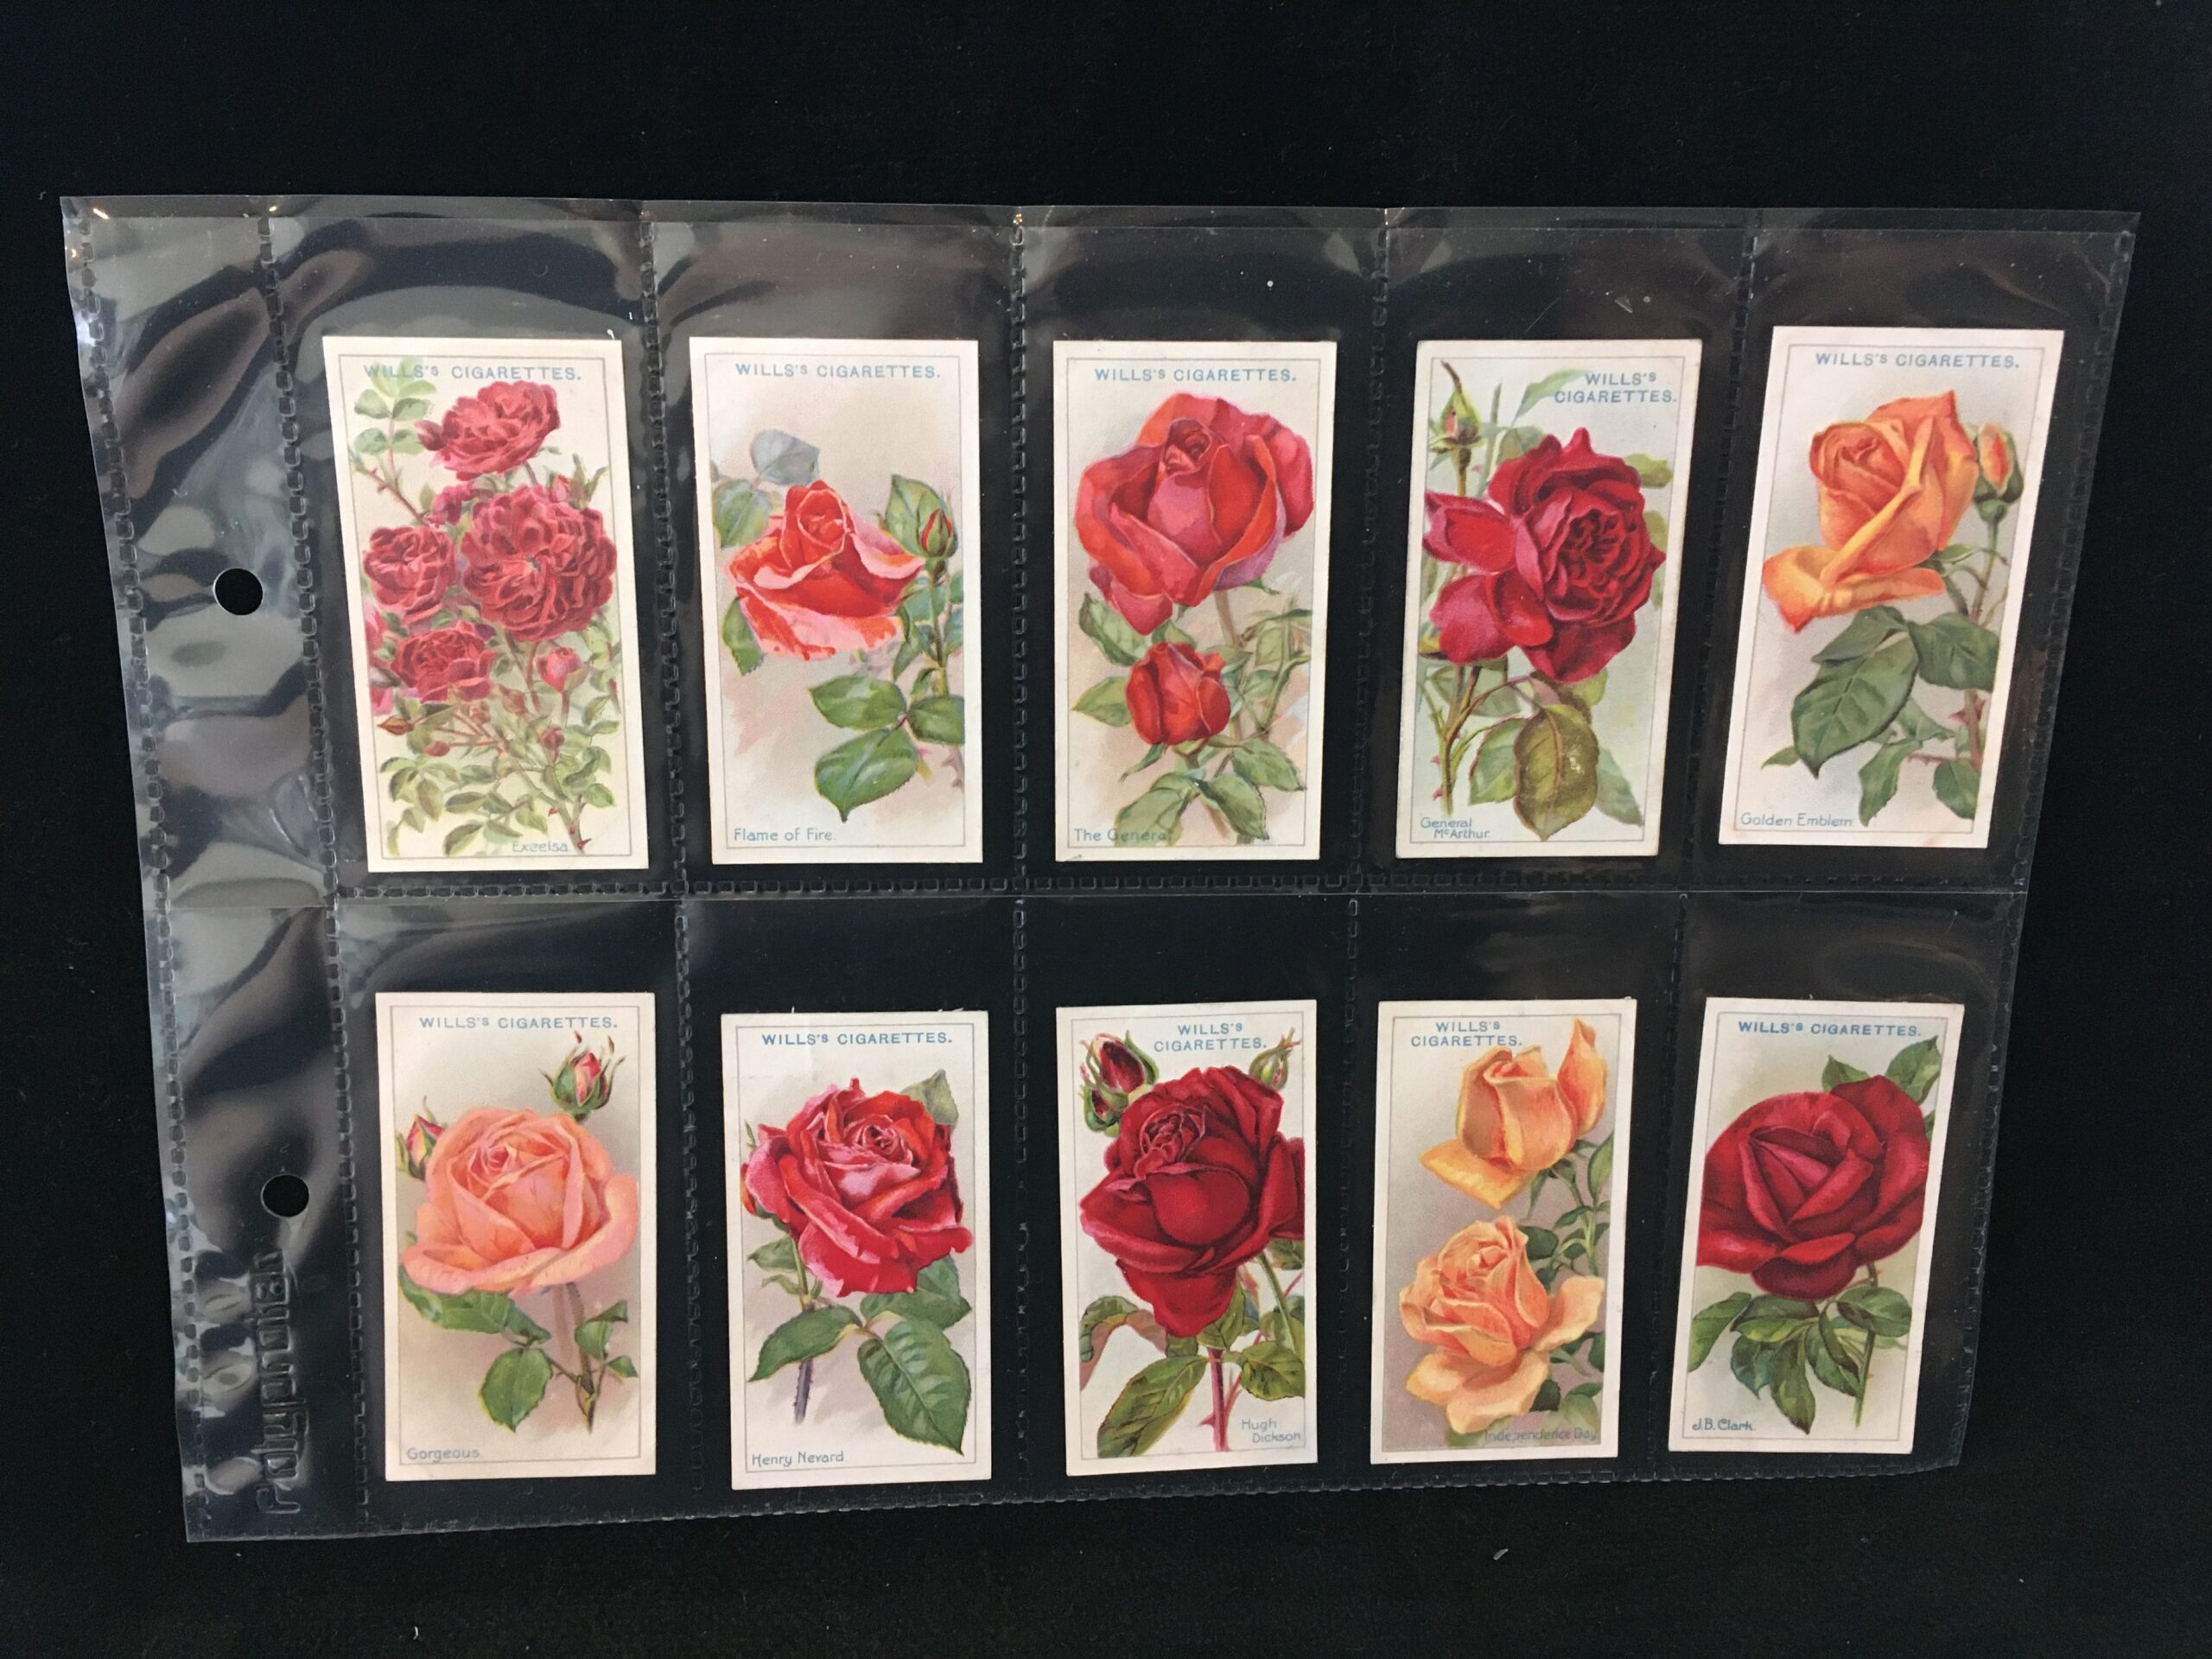 Roses (1926) - Cigarette cards | Trade cards | Coins | Stamps